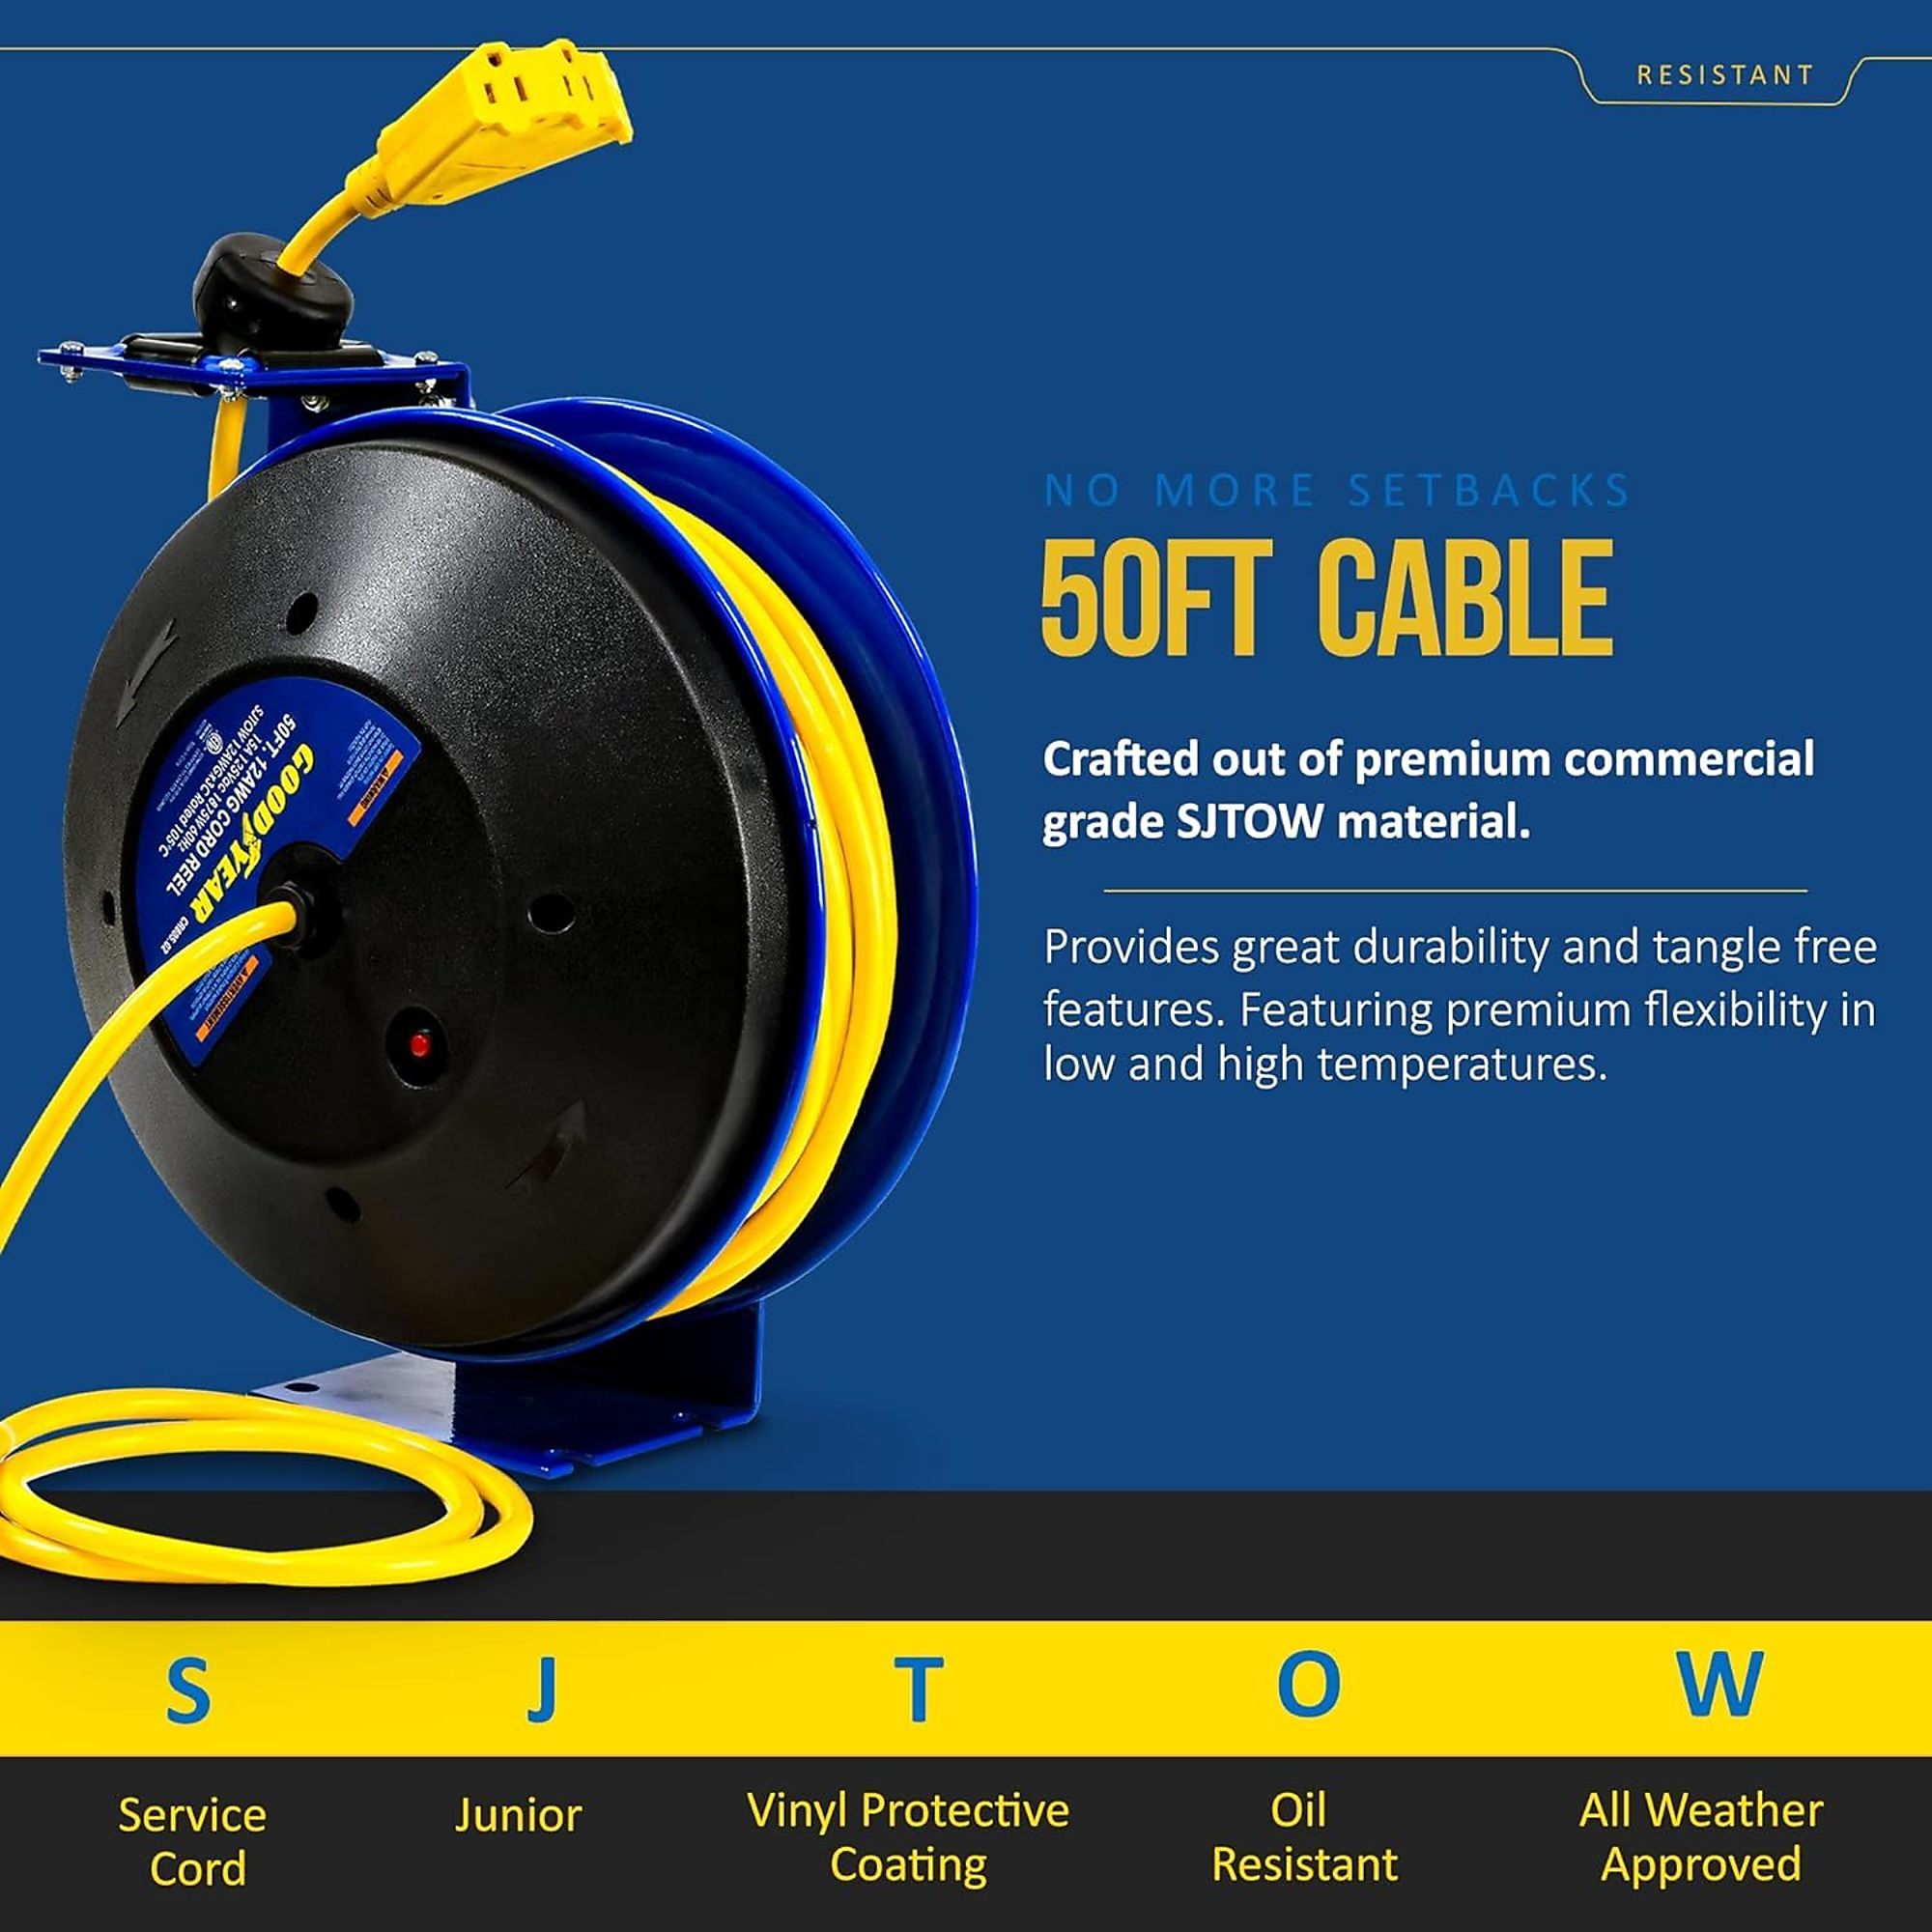 Goodyear, Retractable Extension Cord Reel 12AWGx50ft., Length 50